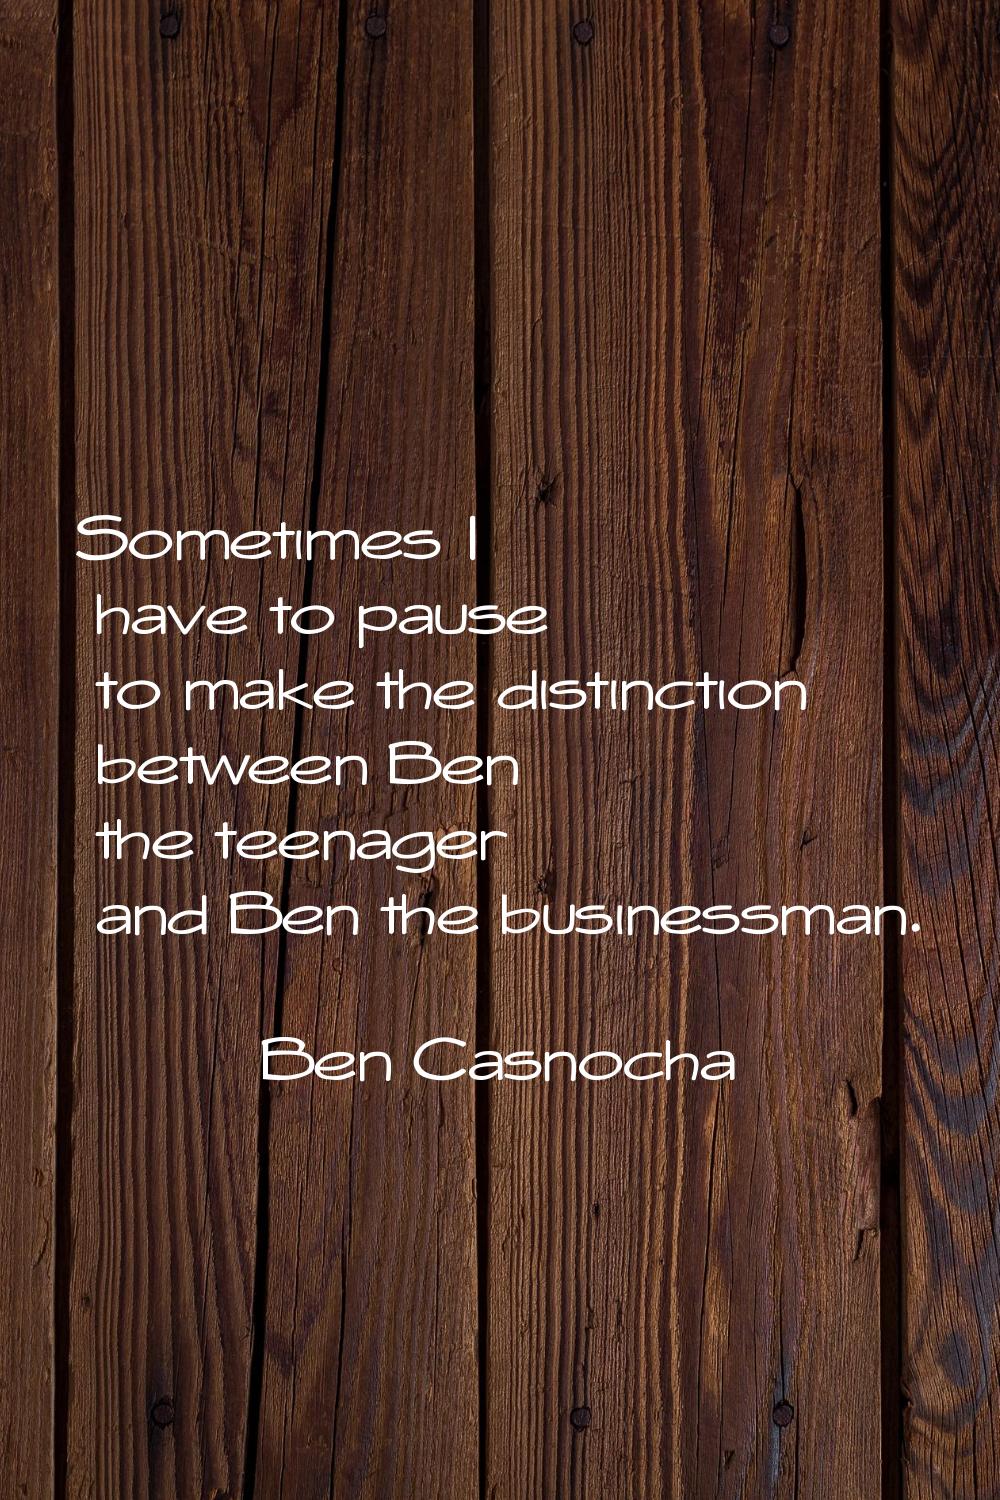 Sometimes I have to pause to make the distinction between Ben the teenager and Ben the businessman.